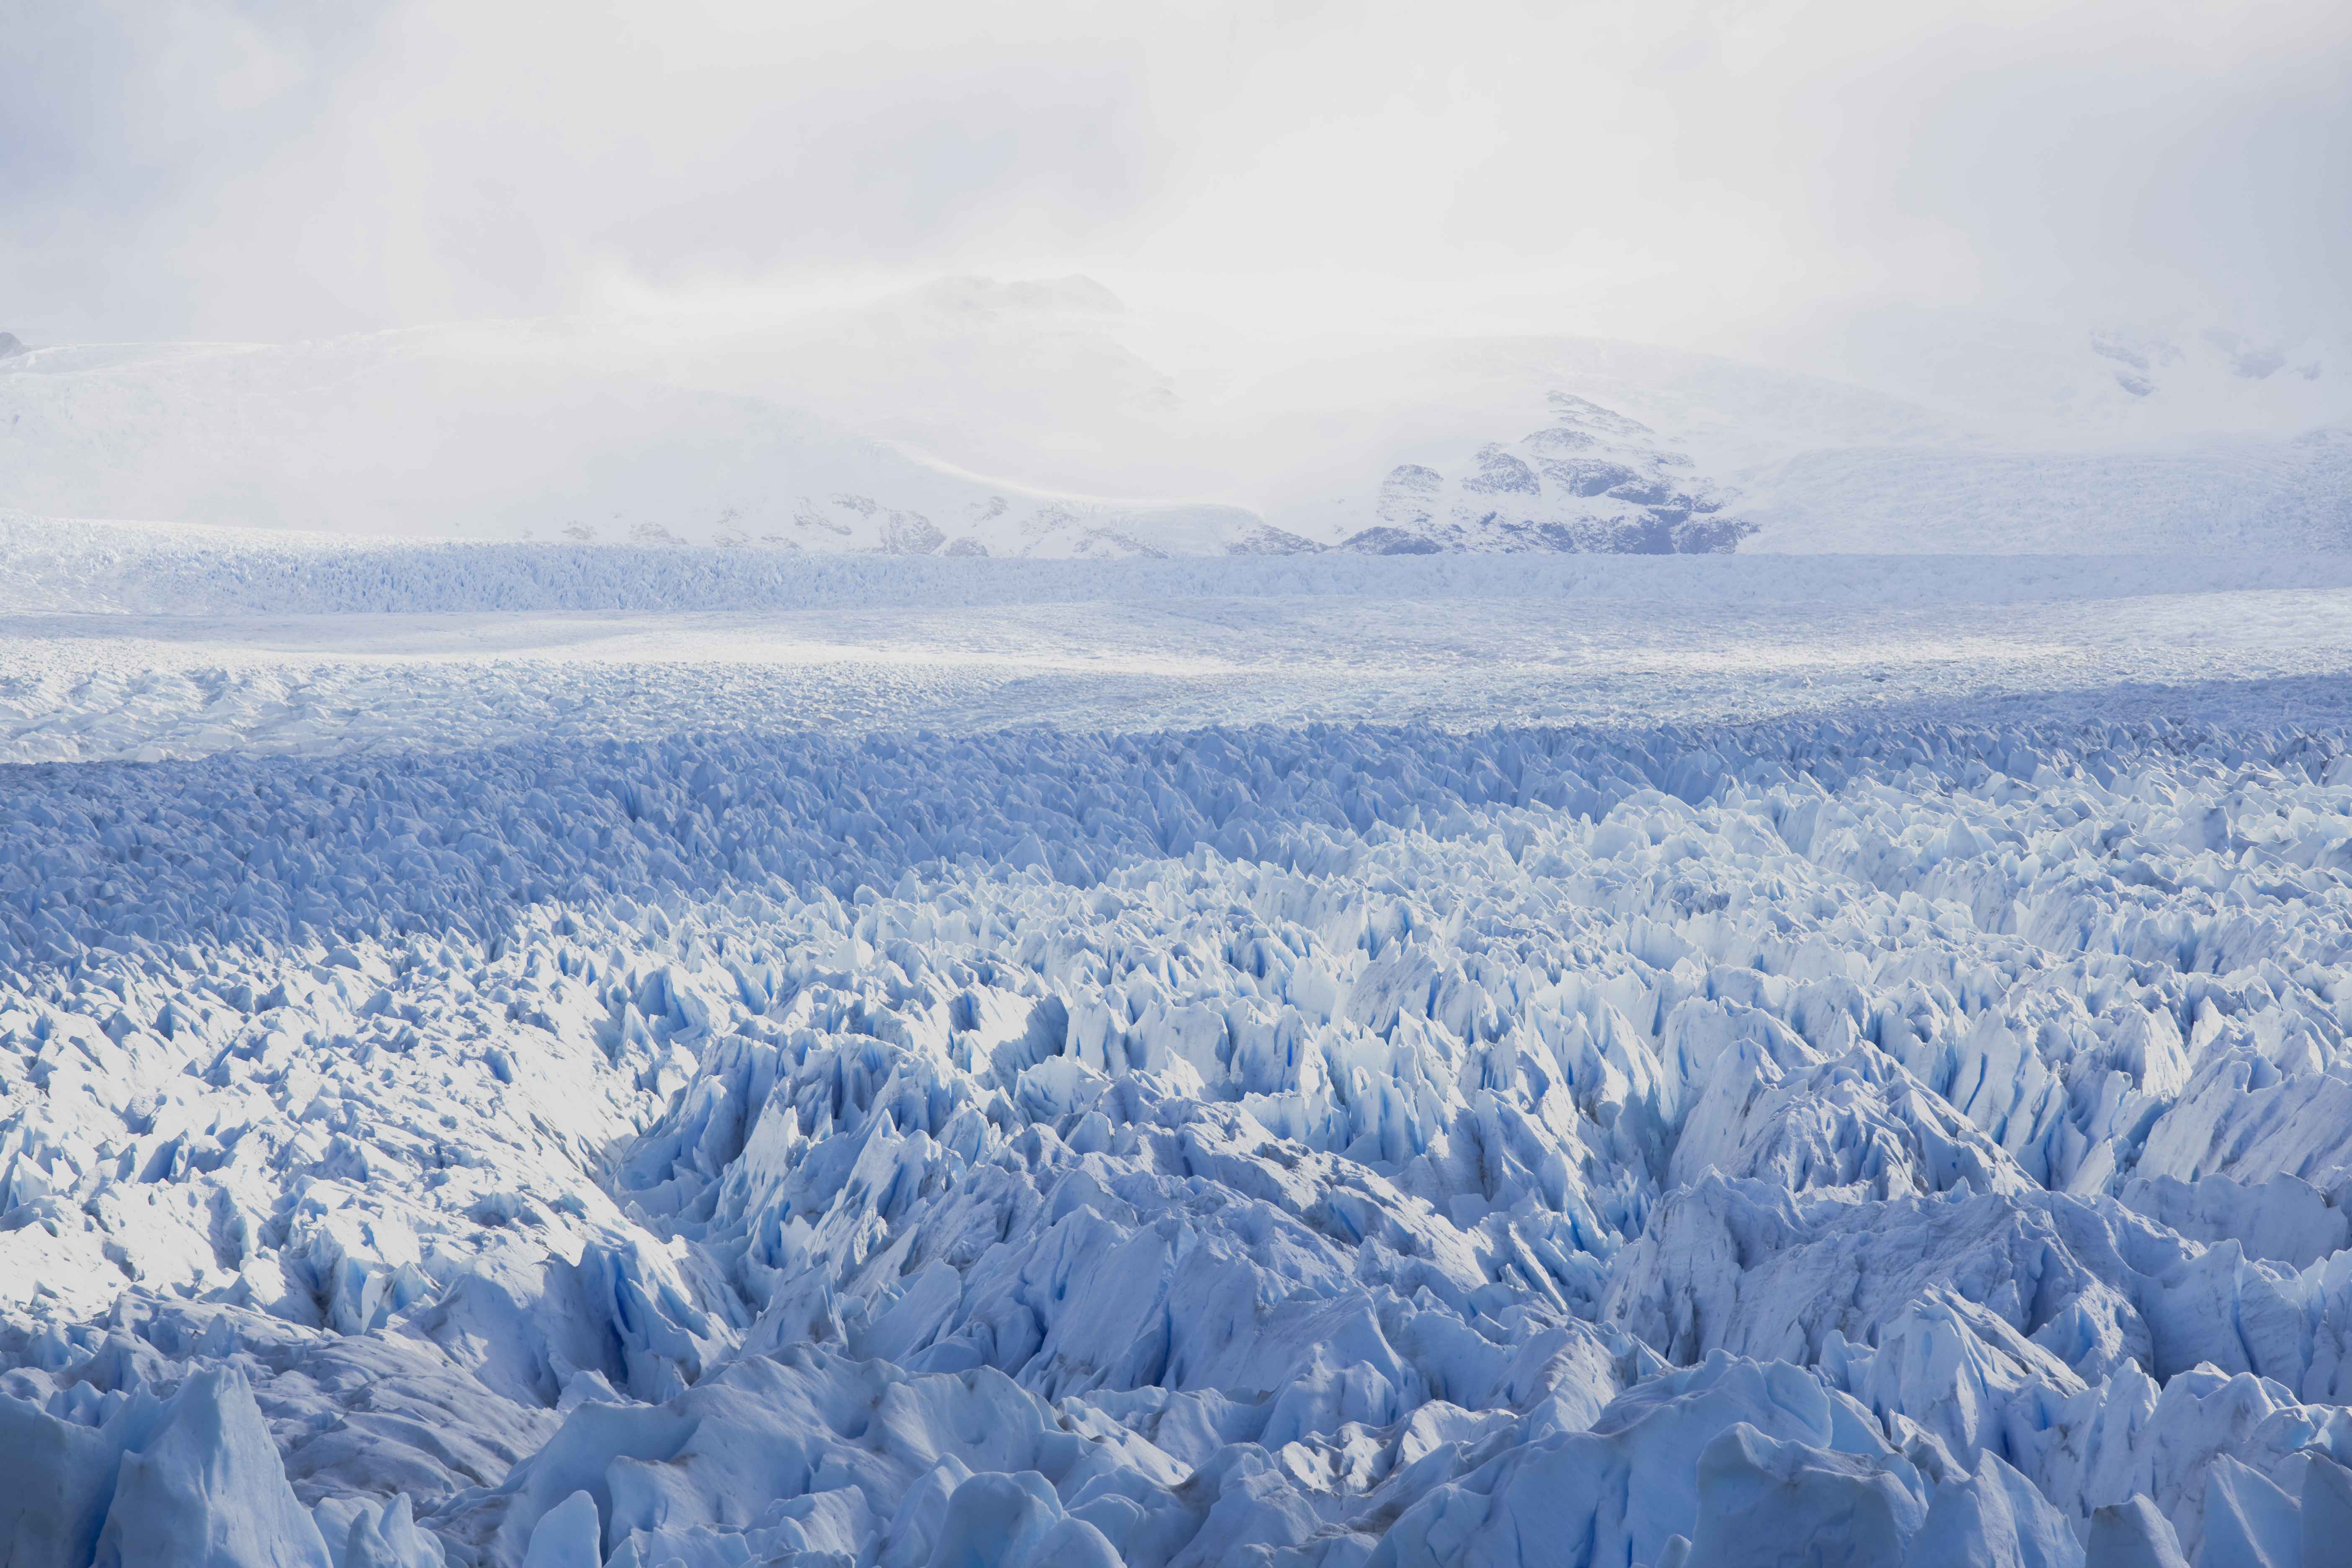 icy landscape showing a glacier and white mountains in the background